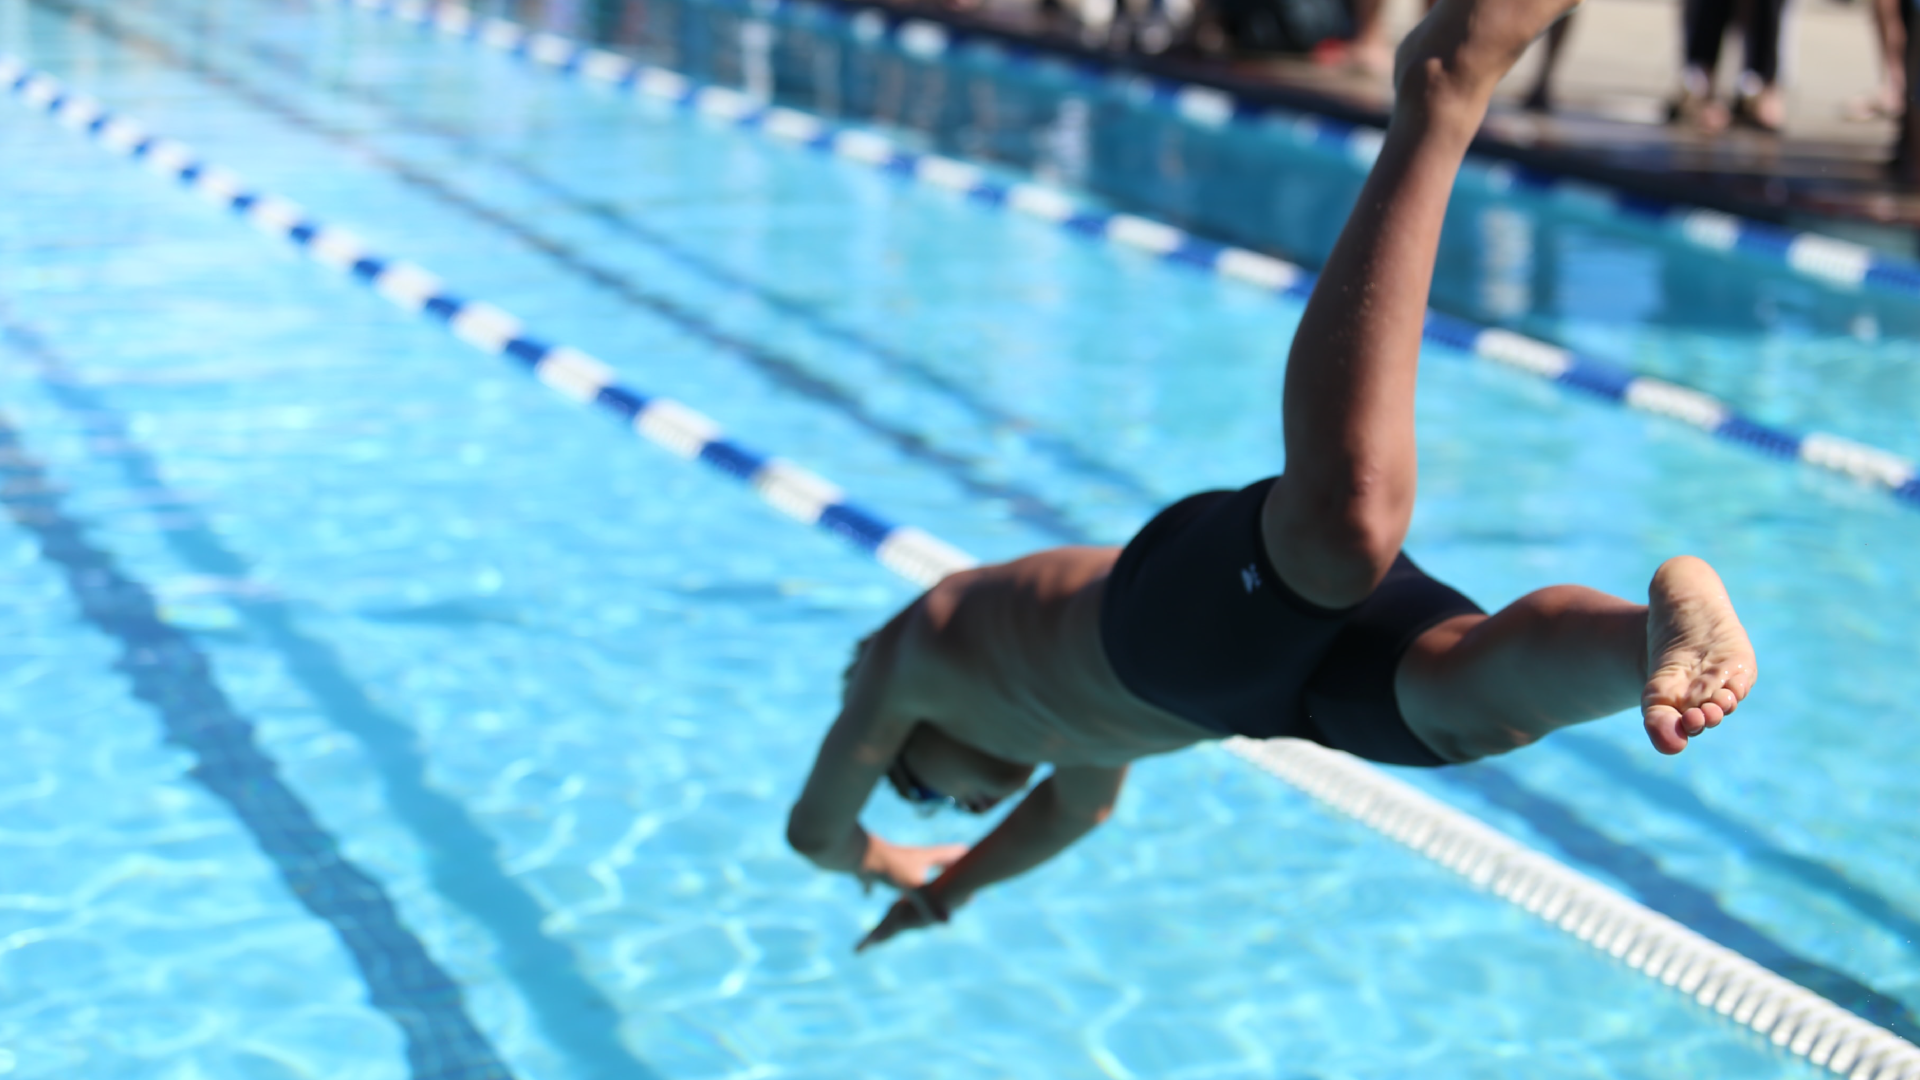 swimmer diving into pool